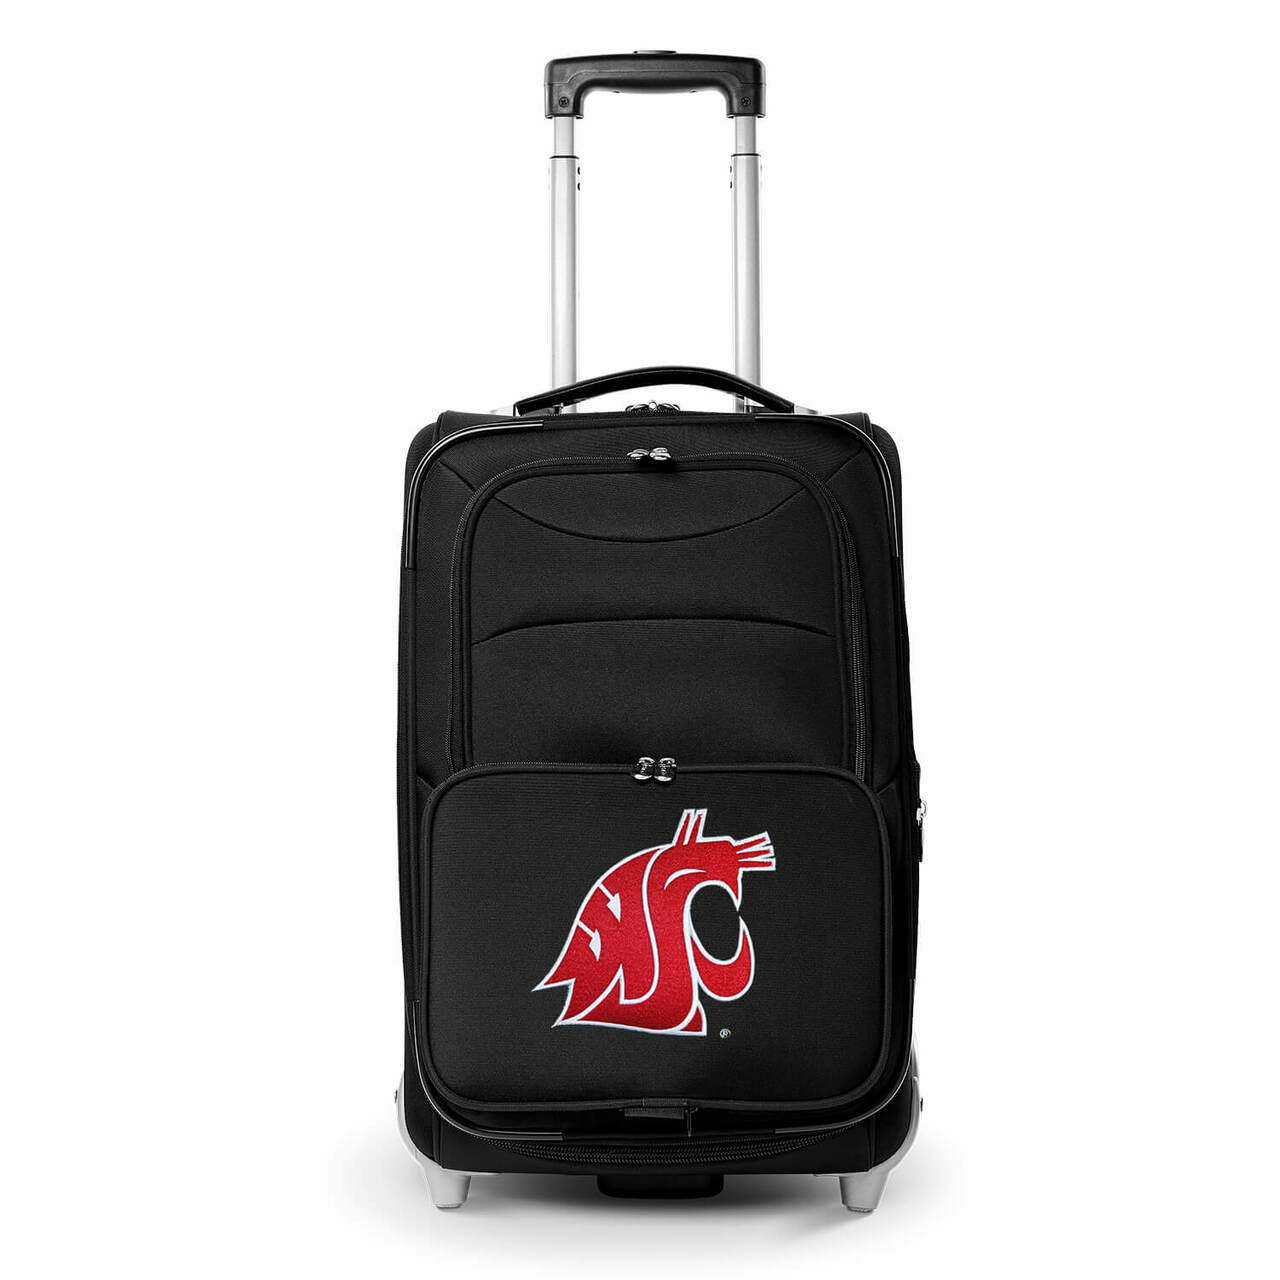 Cougars Carry On Luggage | Washington State Cougars Rolling Carry On Luggage